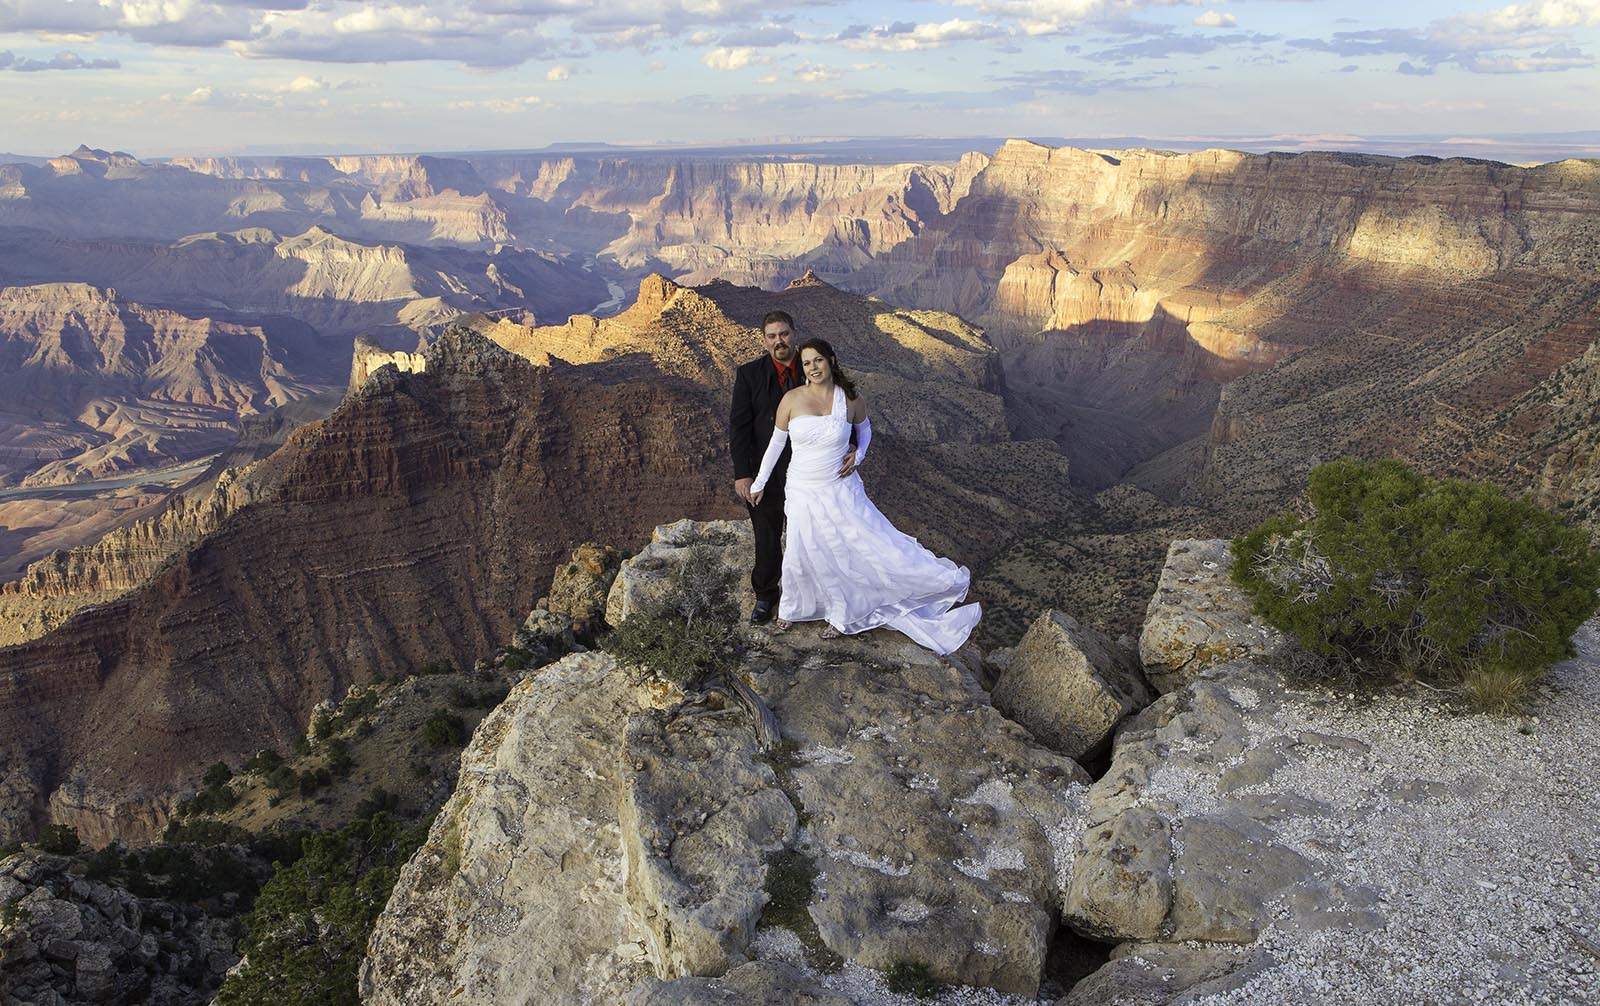 A wedding at the Grand Canyon in October at Lipan point